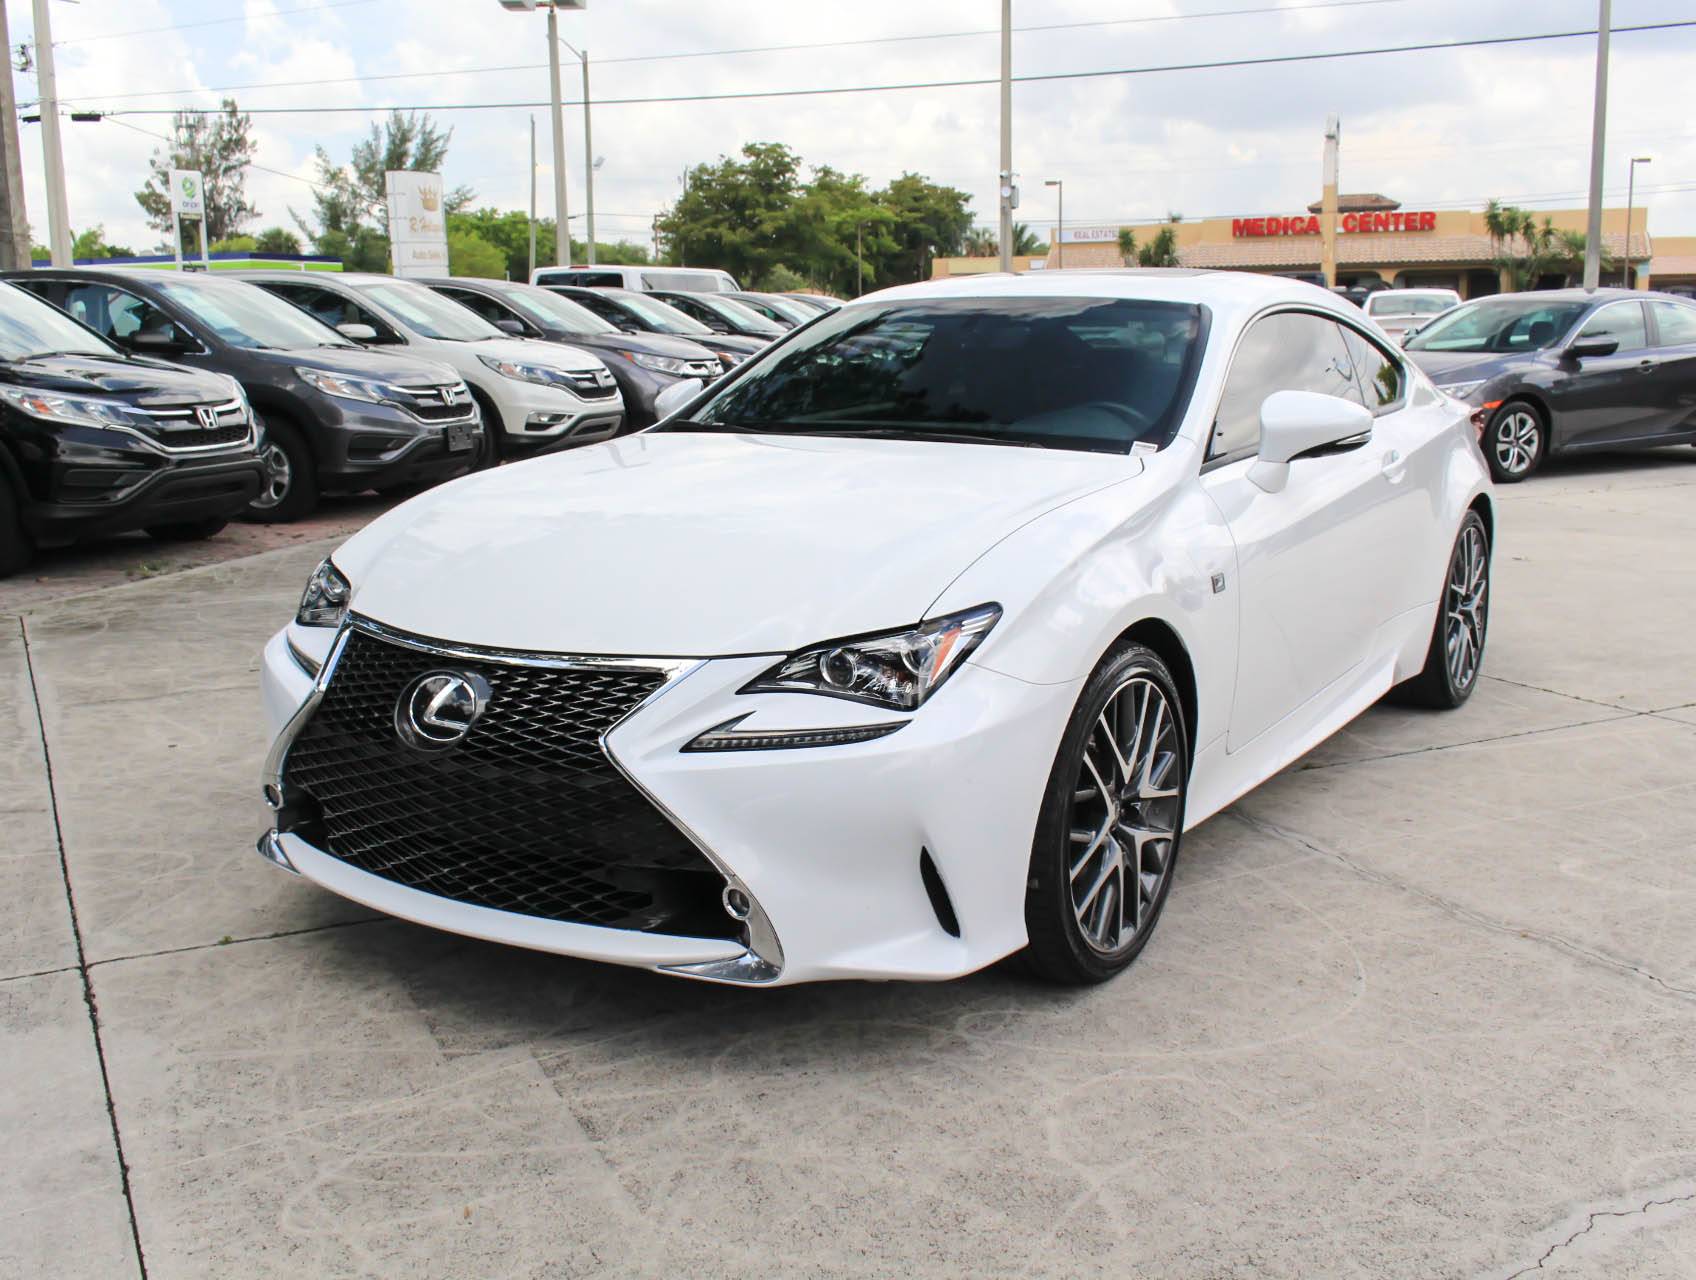 Used 2016 LEXUS RC 200T F Sport for sale in HOLLYWOOD | 104666